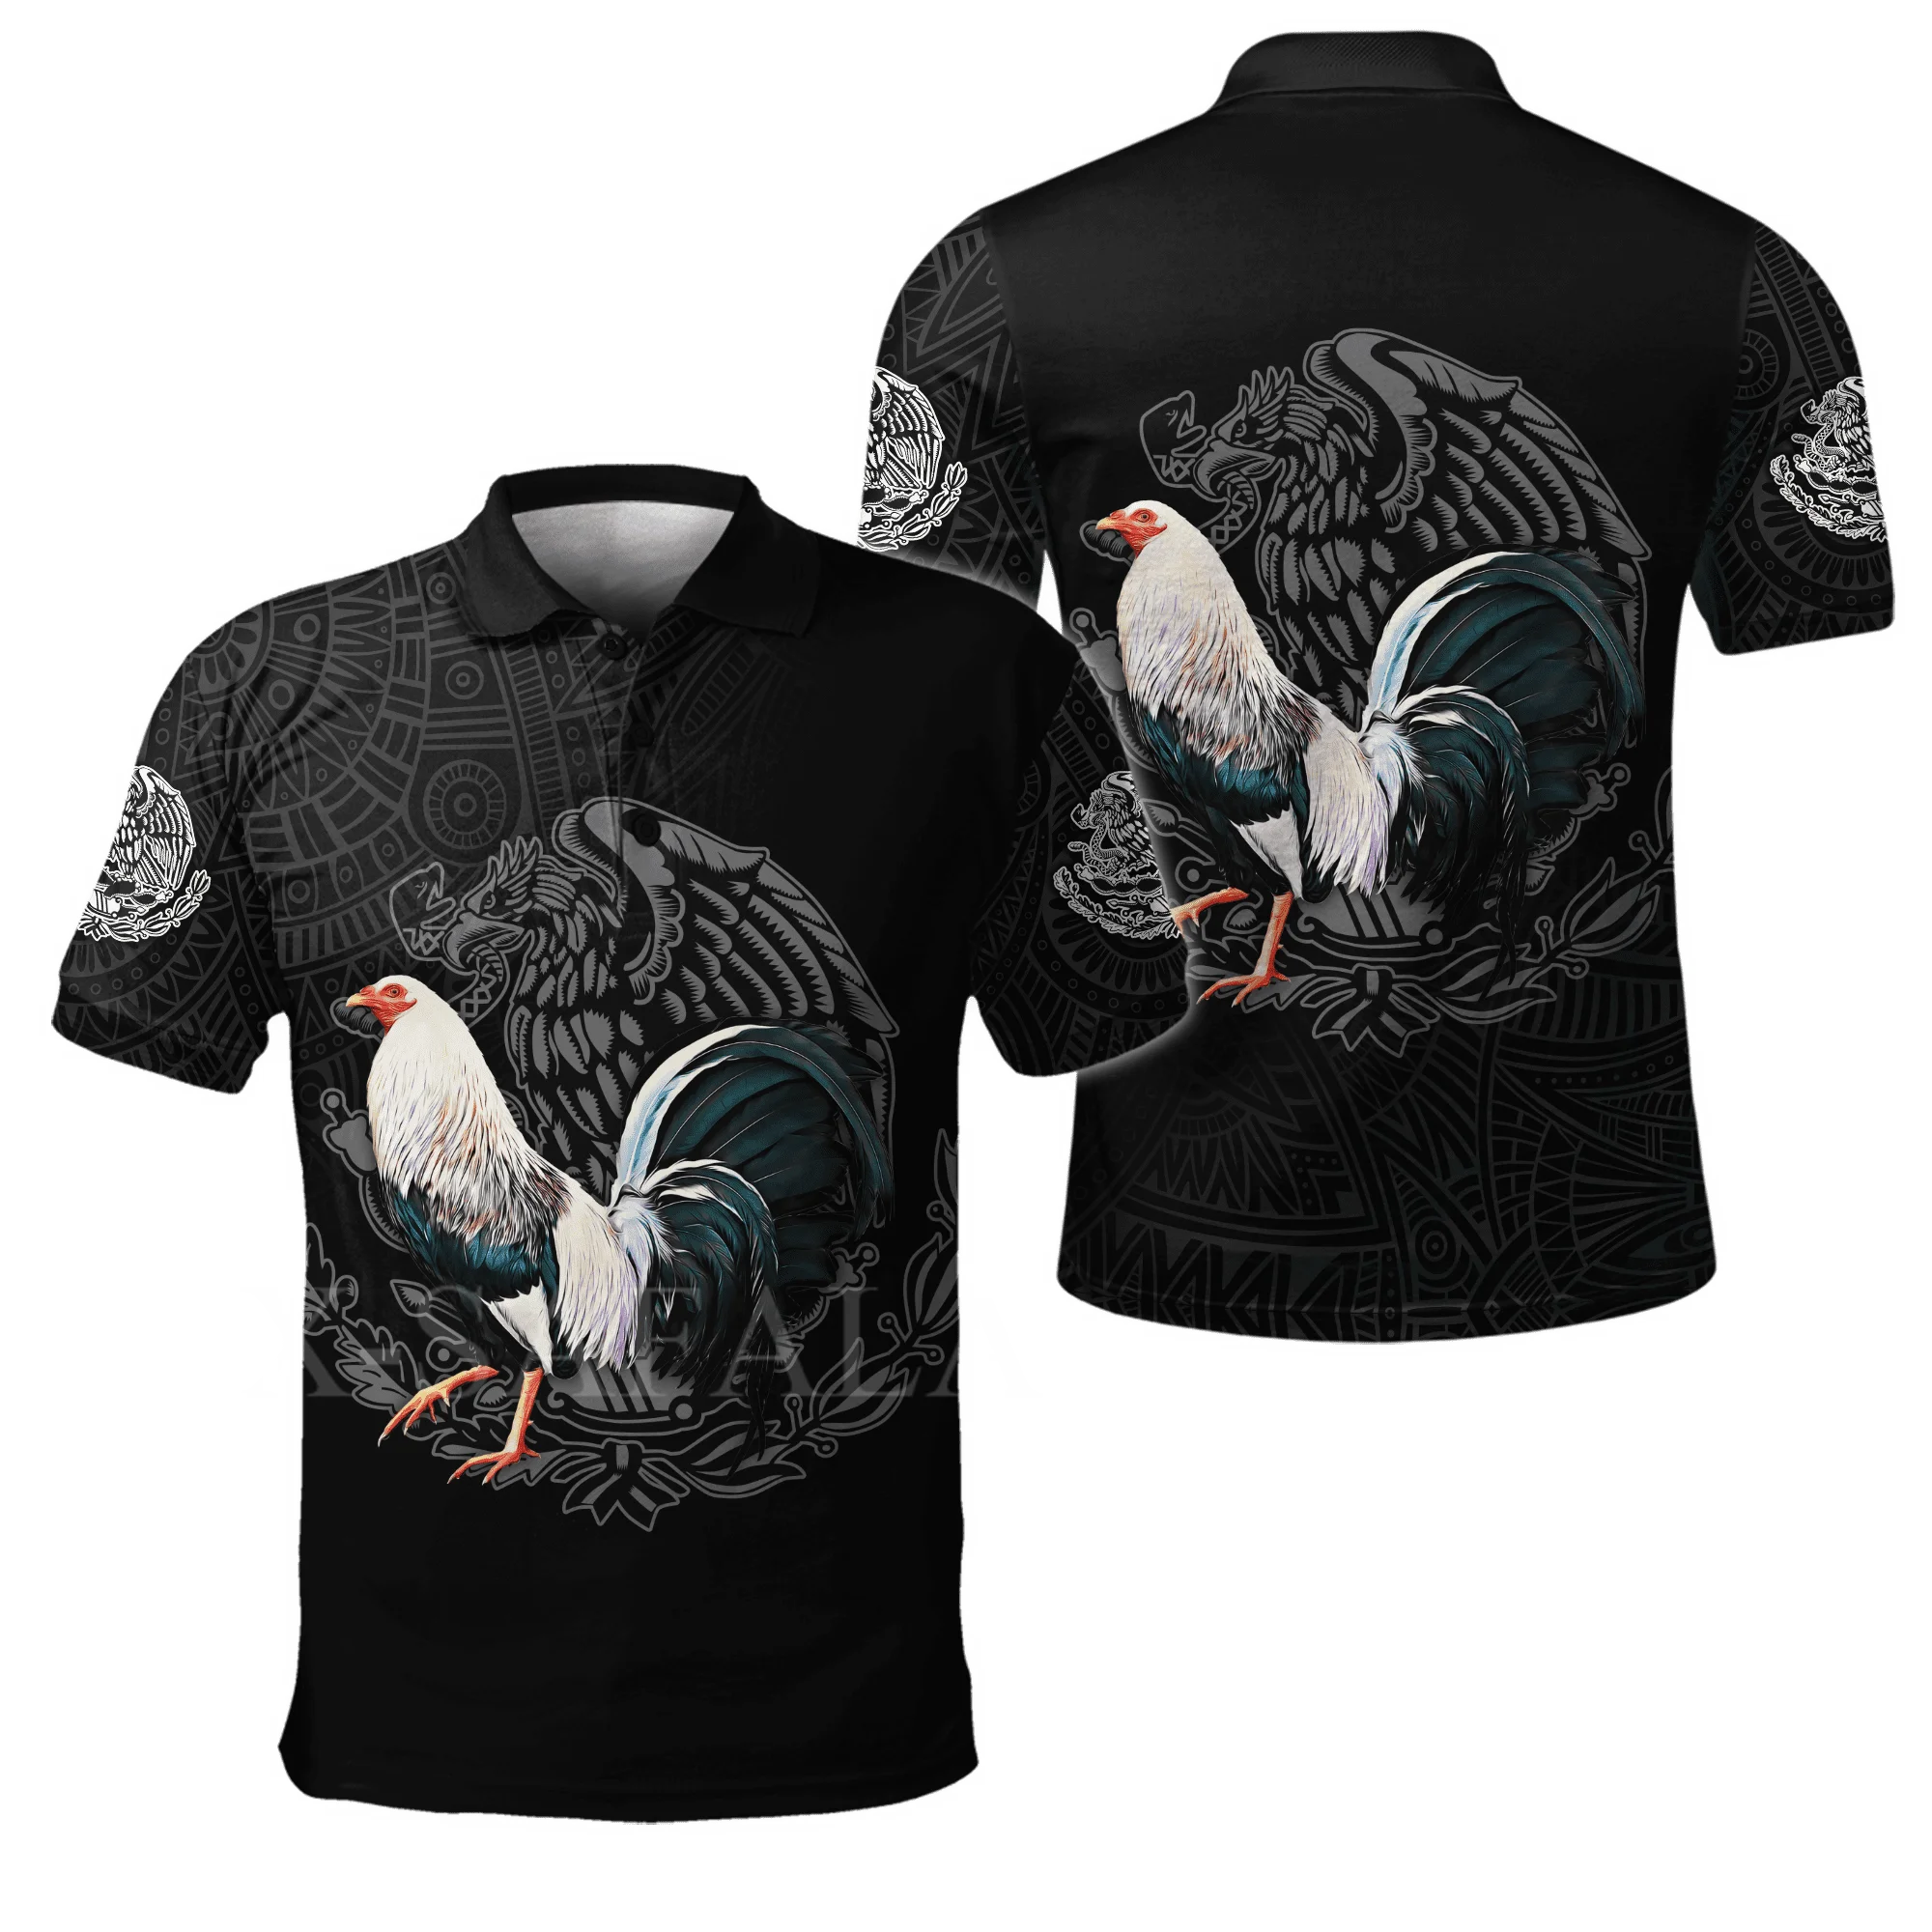 Love Beautiful Mexican Rooster 3D Full Printed Men Women Thin Polo Shirt Collar Short Sleeve Street Wear Casual Tee